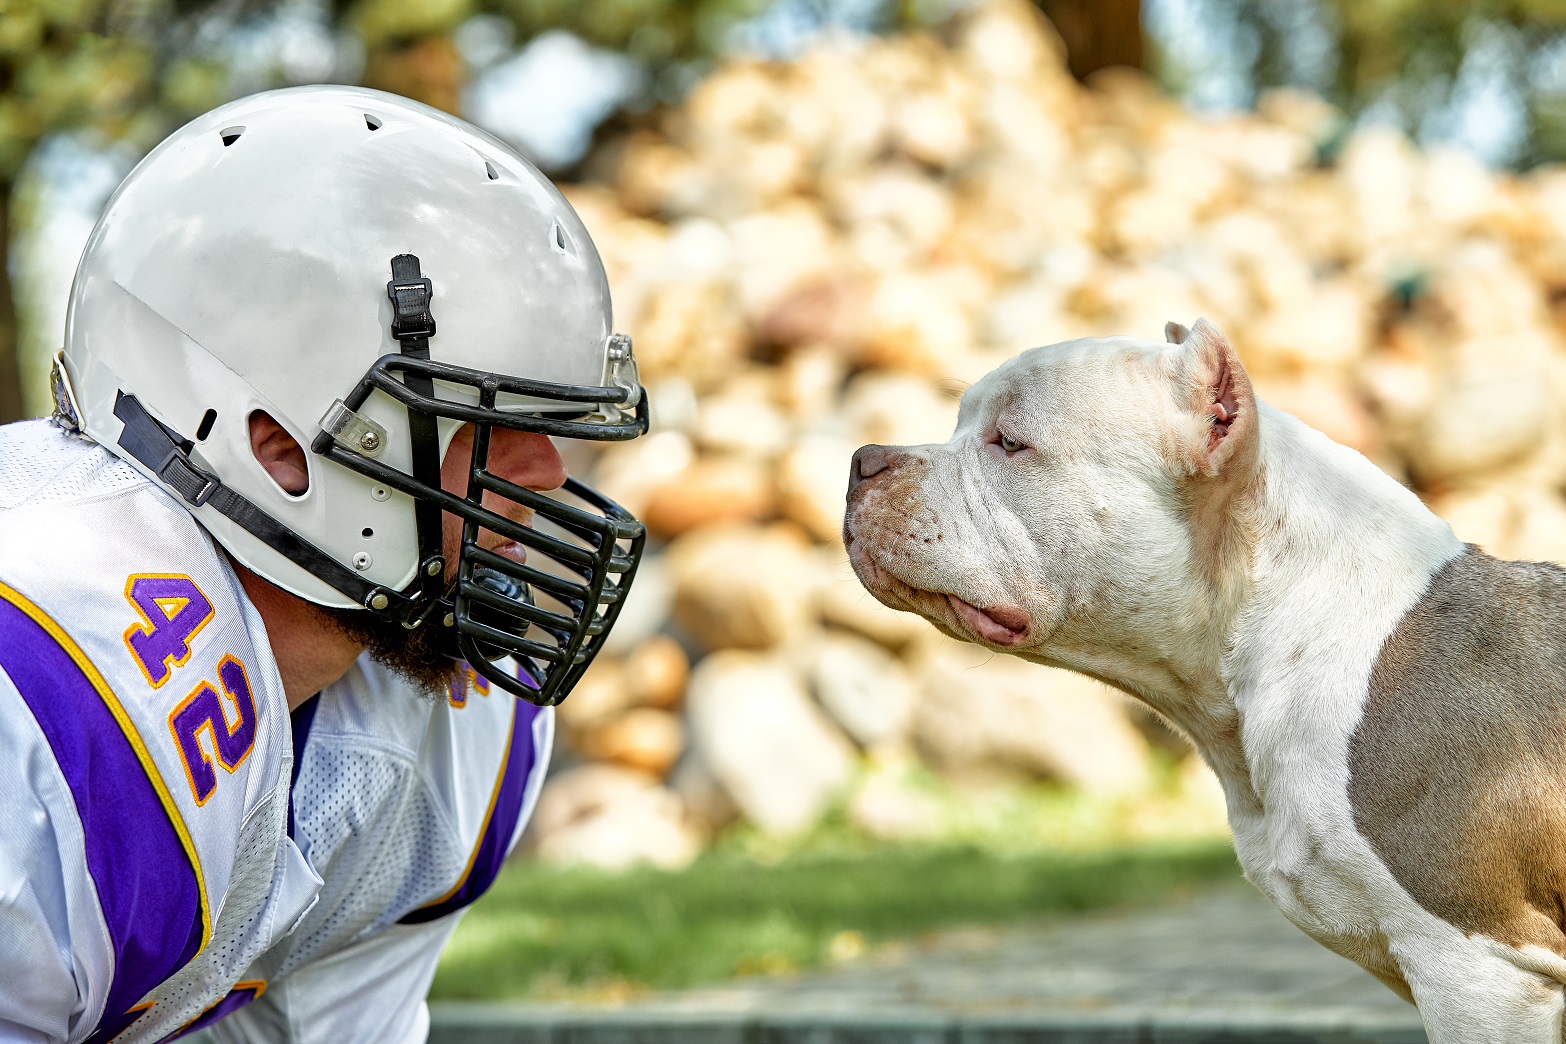 Face To Face Man And Dog. An American Football Player In A Helme